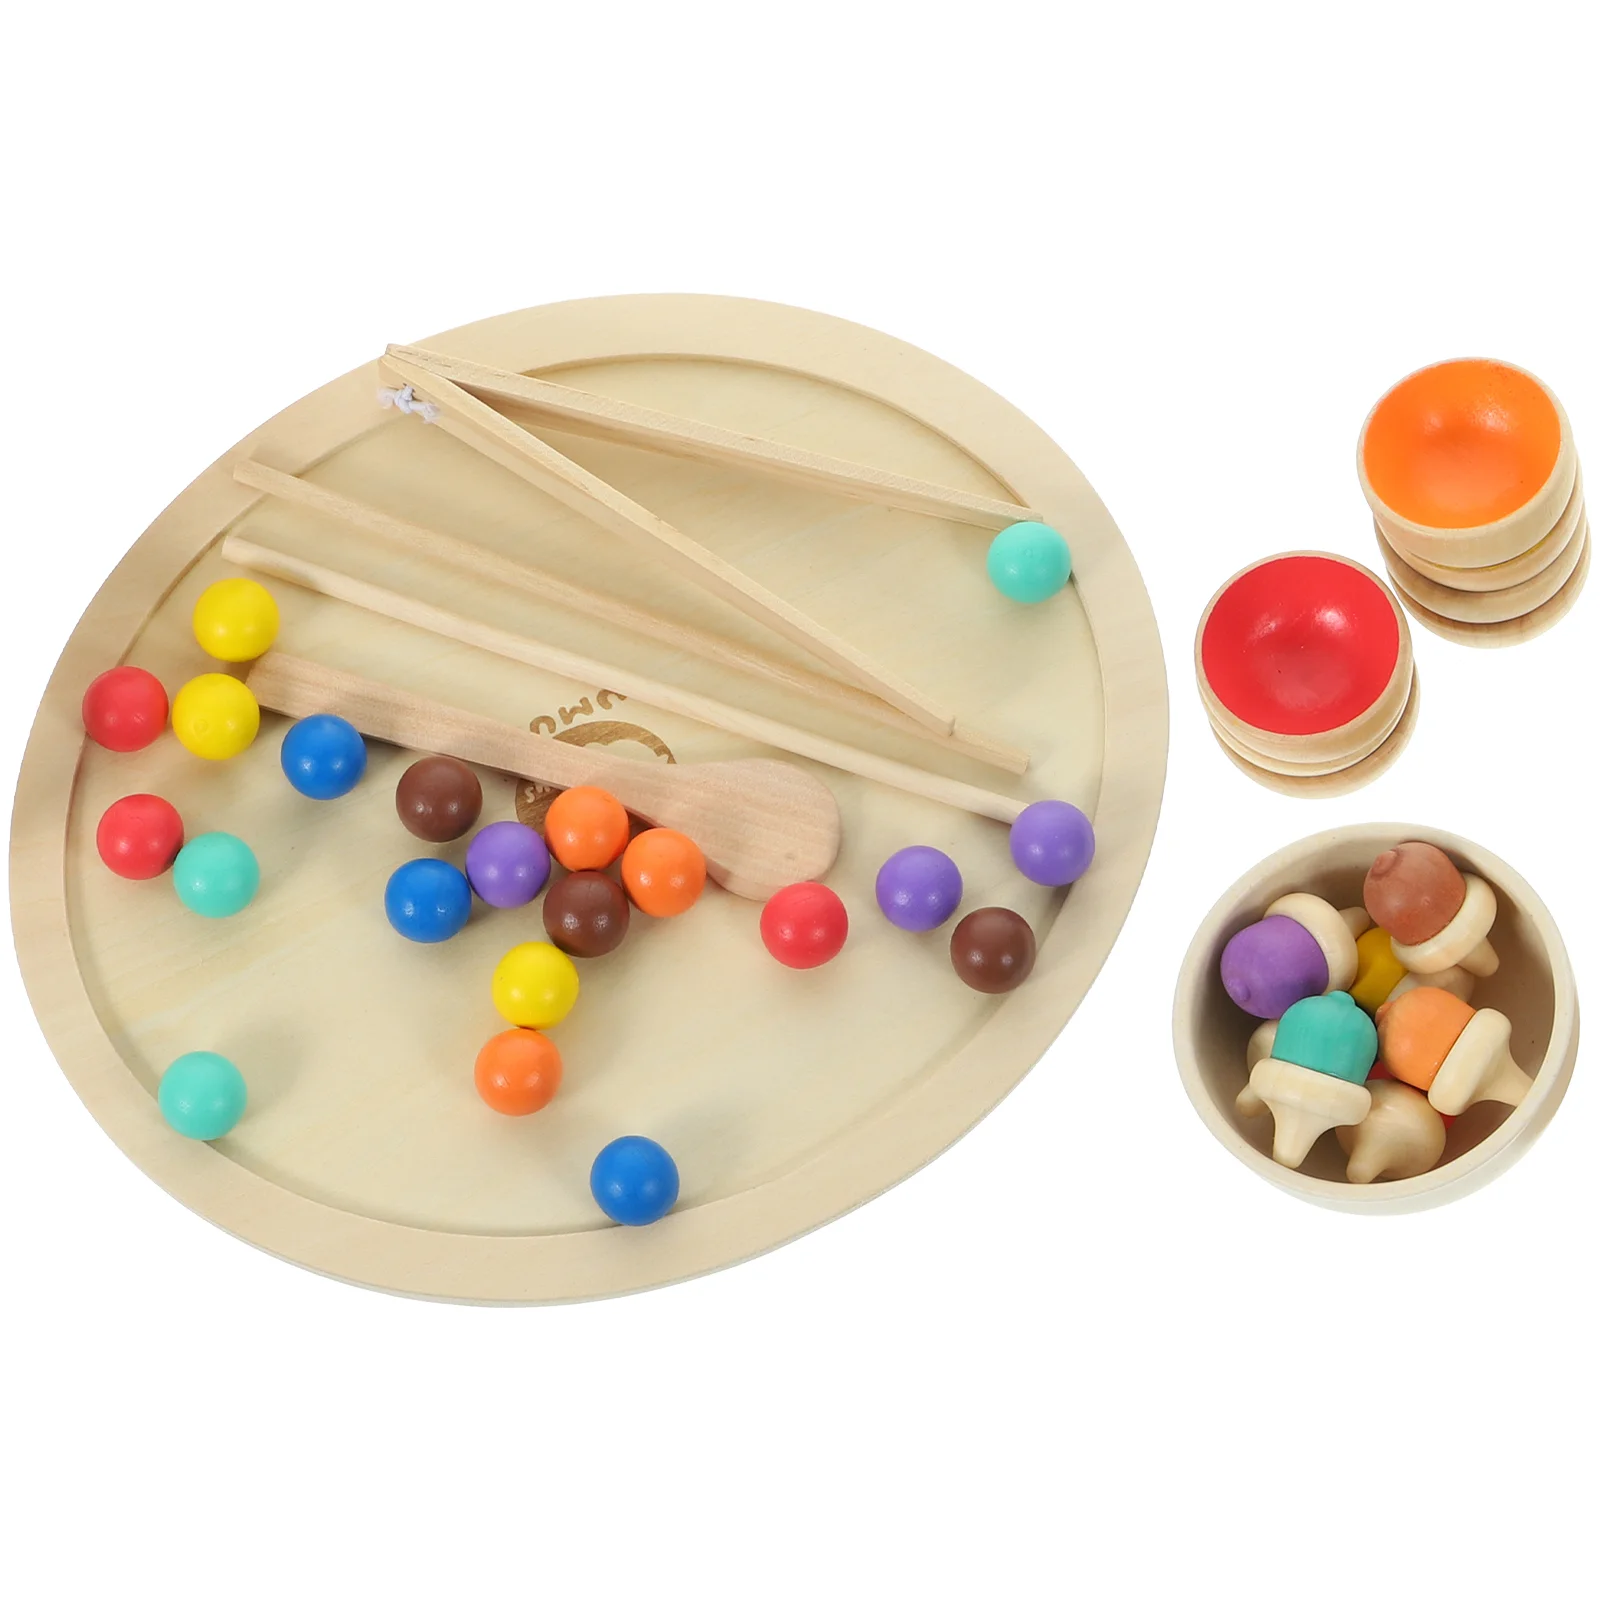 

Wooden Toys Gyroscopes Counting Rainbow Puzzle Fine Motor Skills Recognition Sensory Child Cognitive Color Matching Sorting